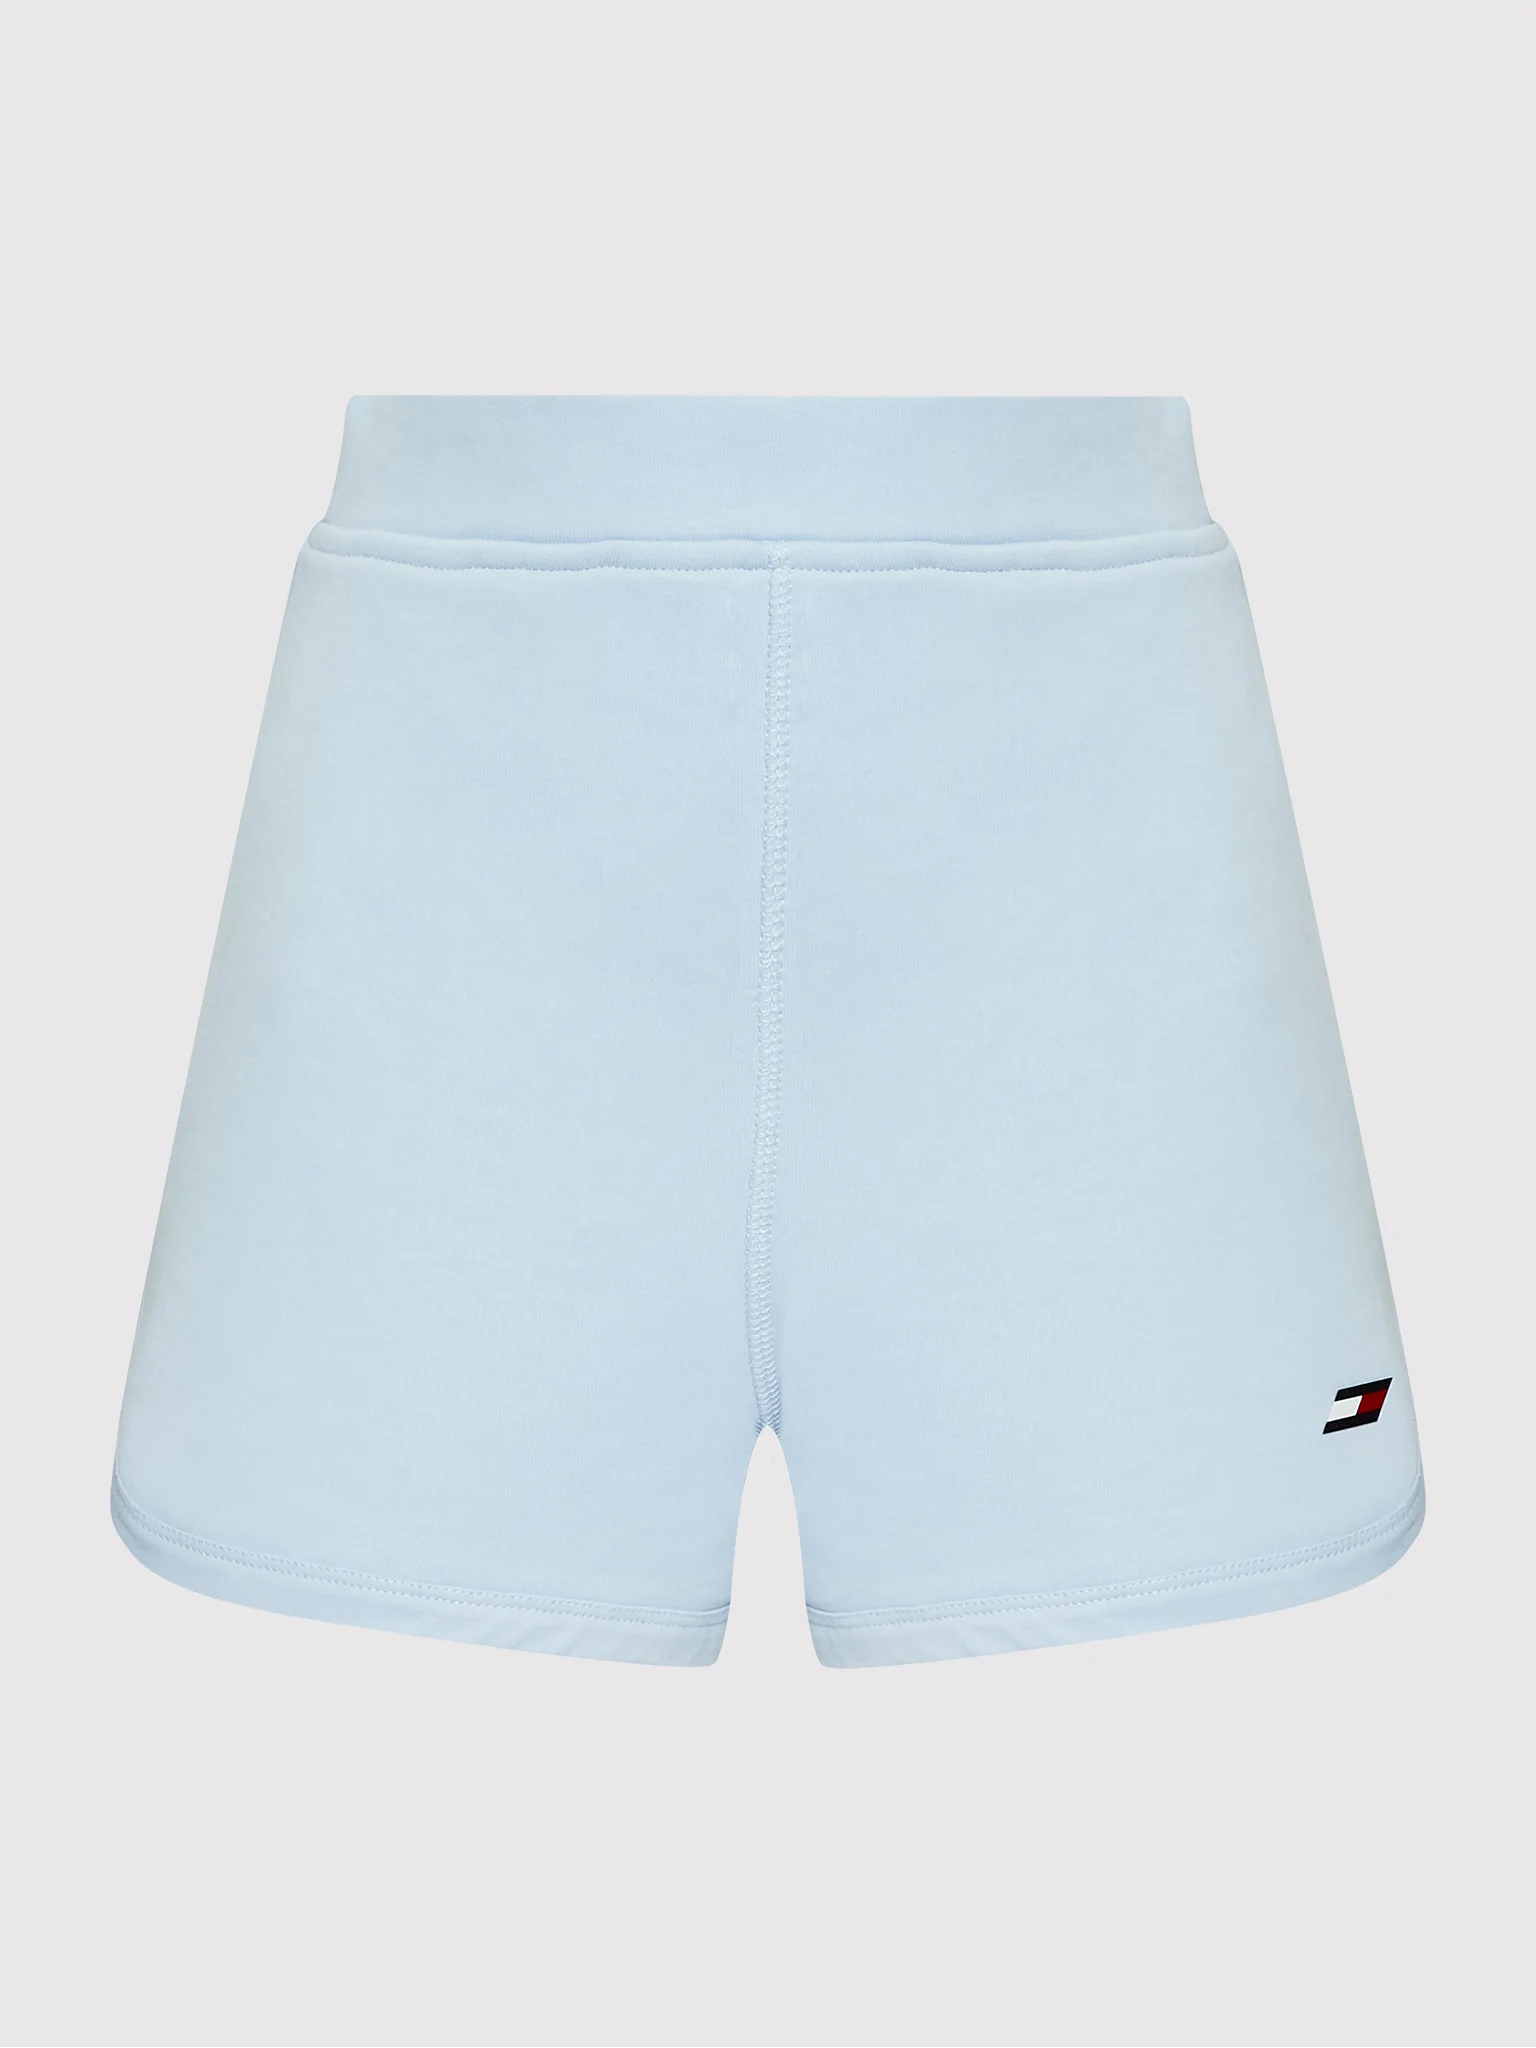 Womens Branded Shorts